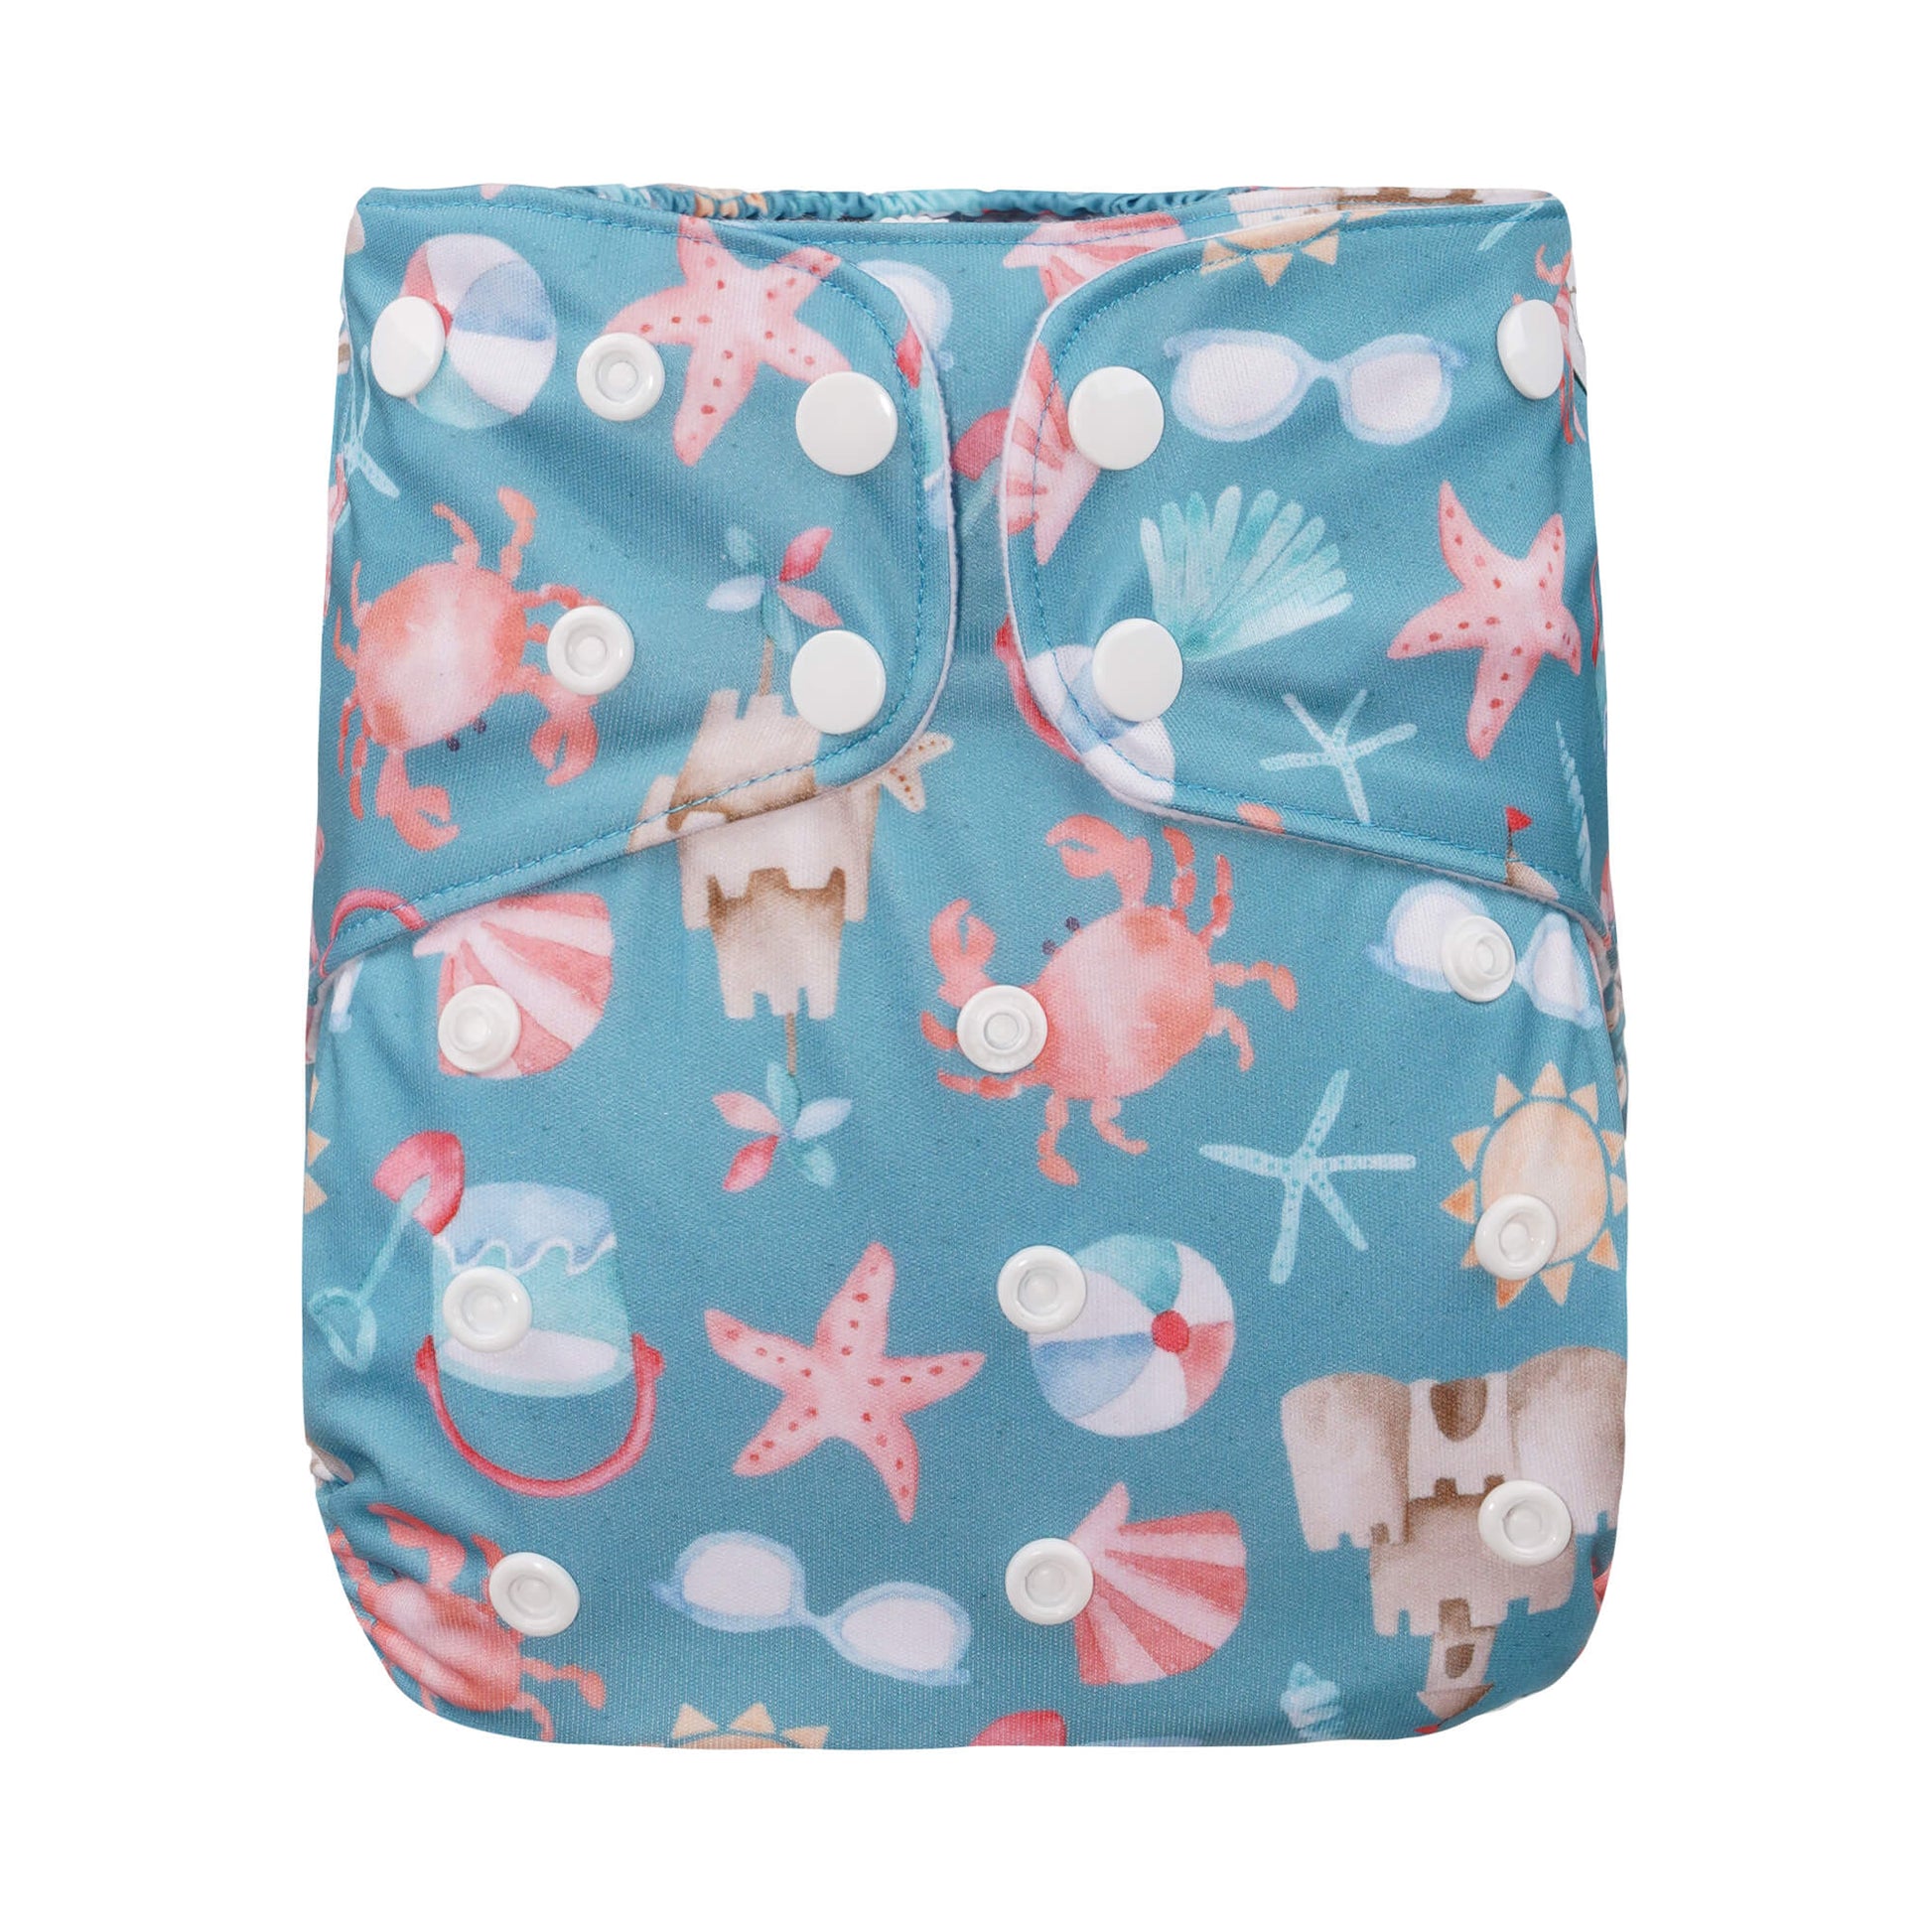 Large Reusable Cloth Nappy by Bear & Moo in Beach Adventures print